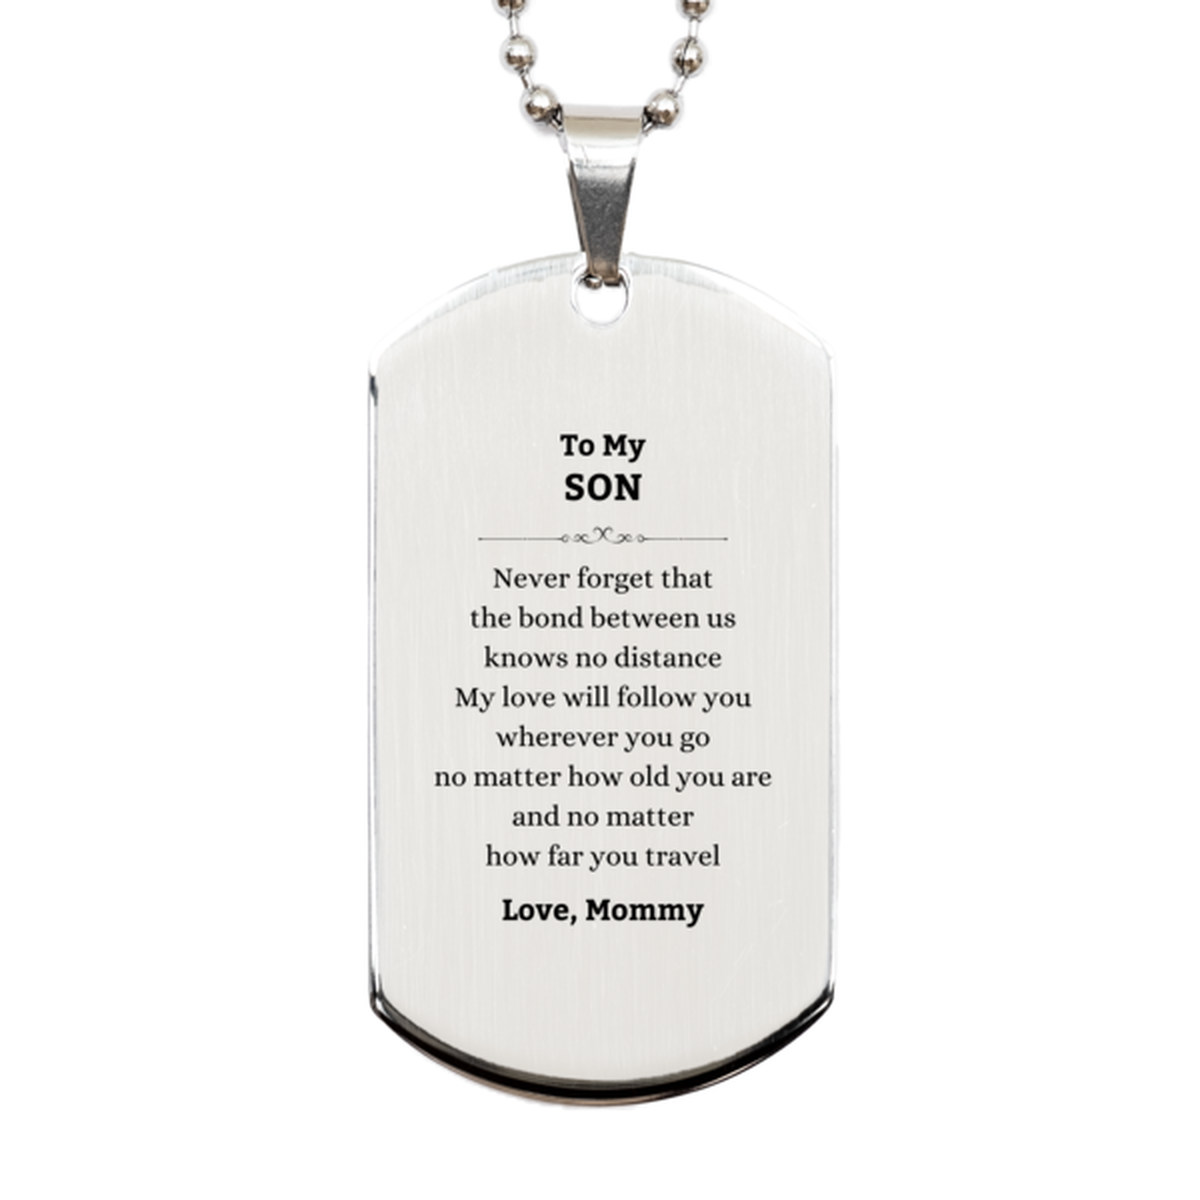 Son Birthday Gifts from Mommy, Adjustable Silver Dog Tag for Son Christmas Graduation Unique Gifts Son Never forget that the bond between us knows no distance. Love, Mommy